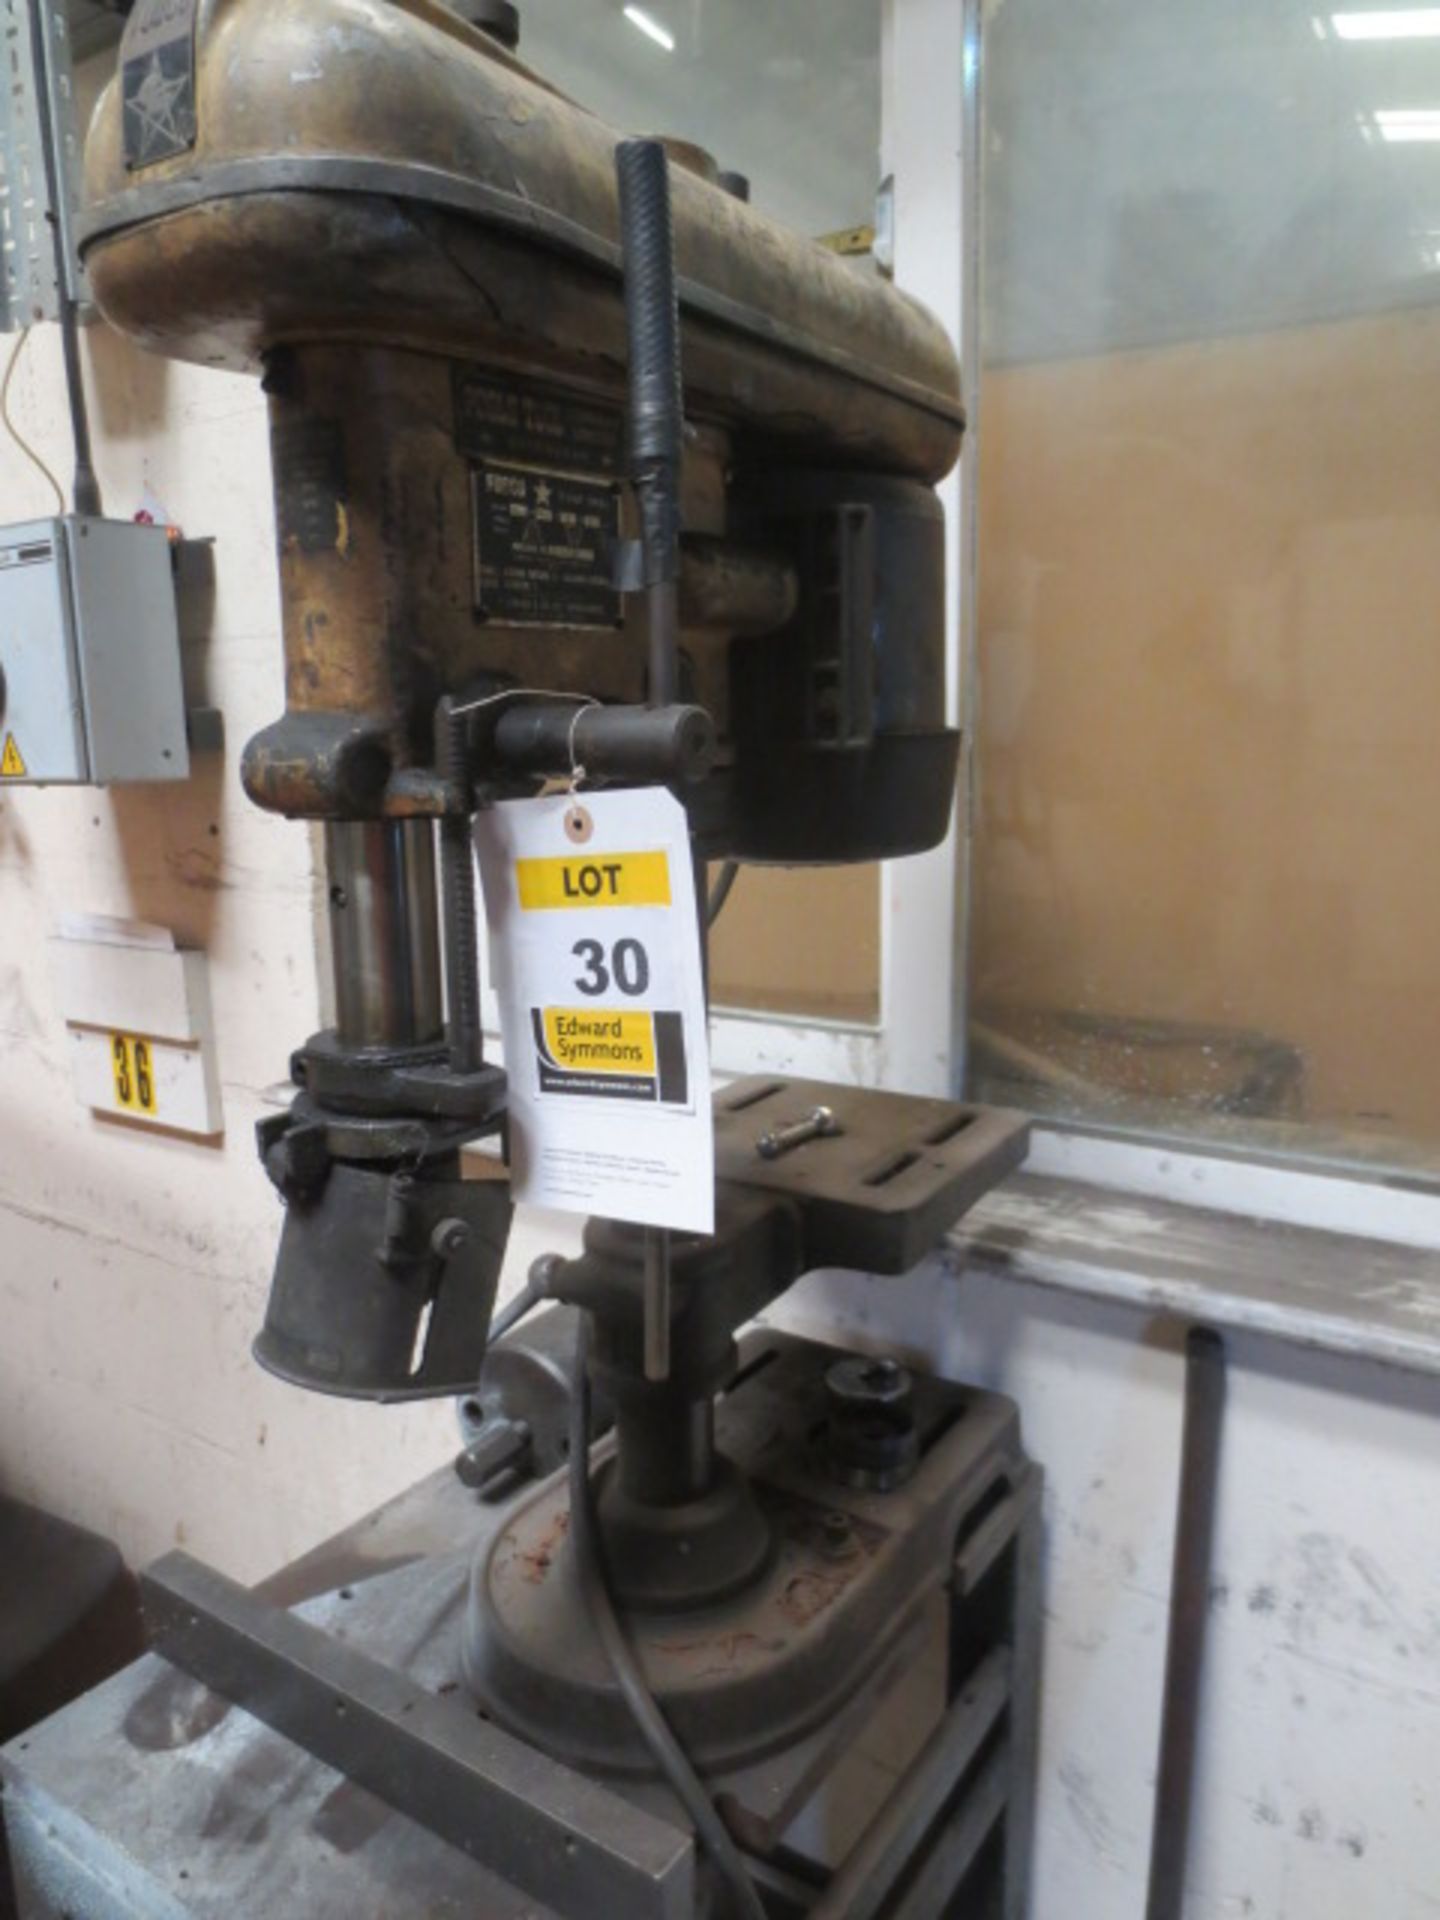 Fobco Model T4 pedestal drill, on mobile stand  (A Work Method Statement and Risk Assessment must be